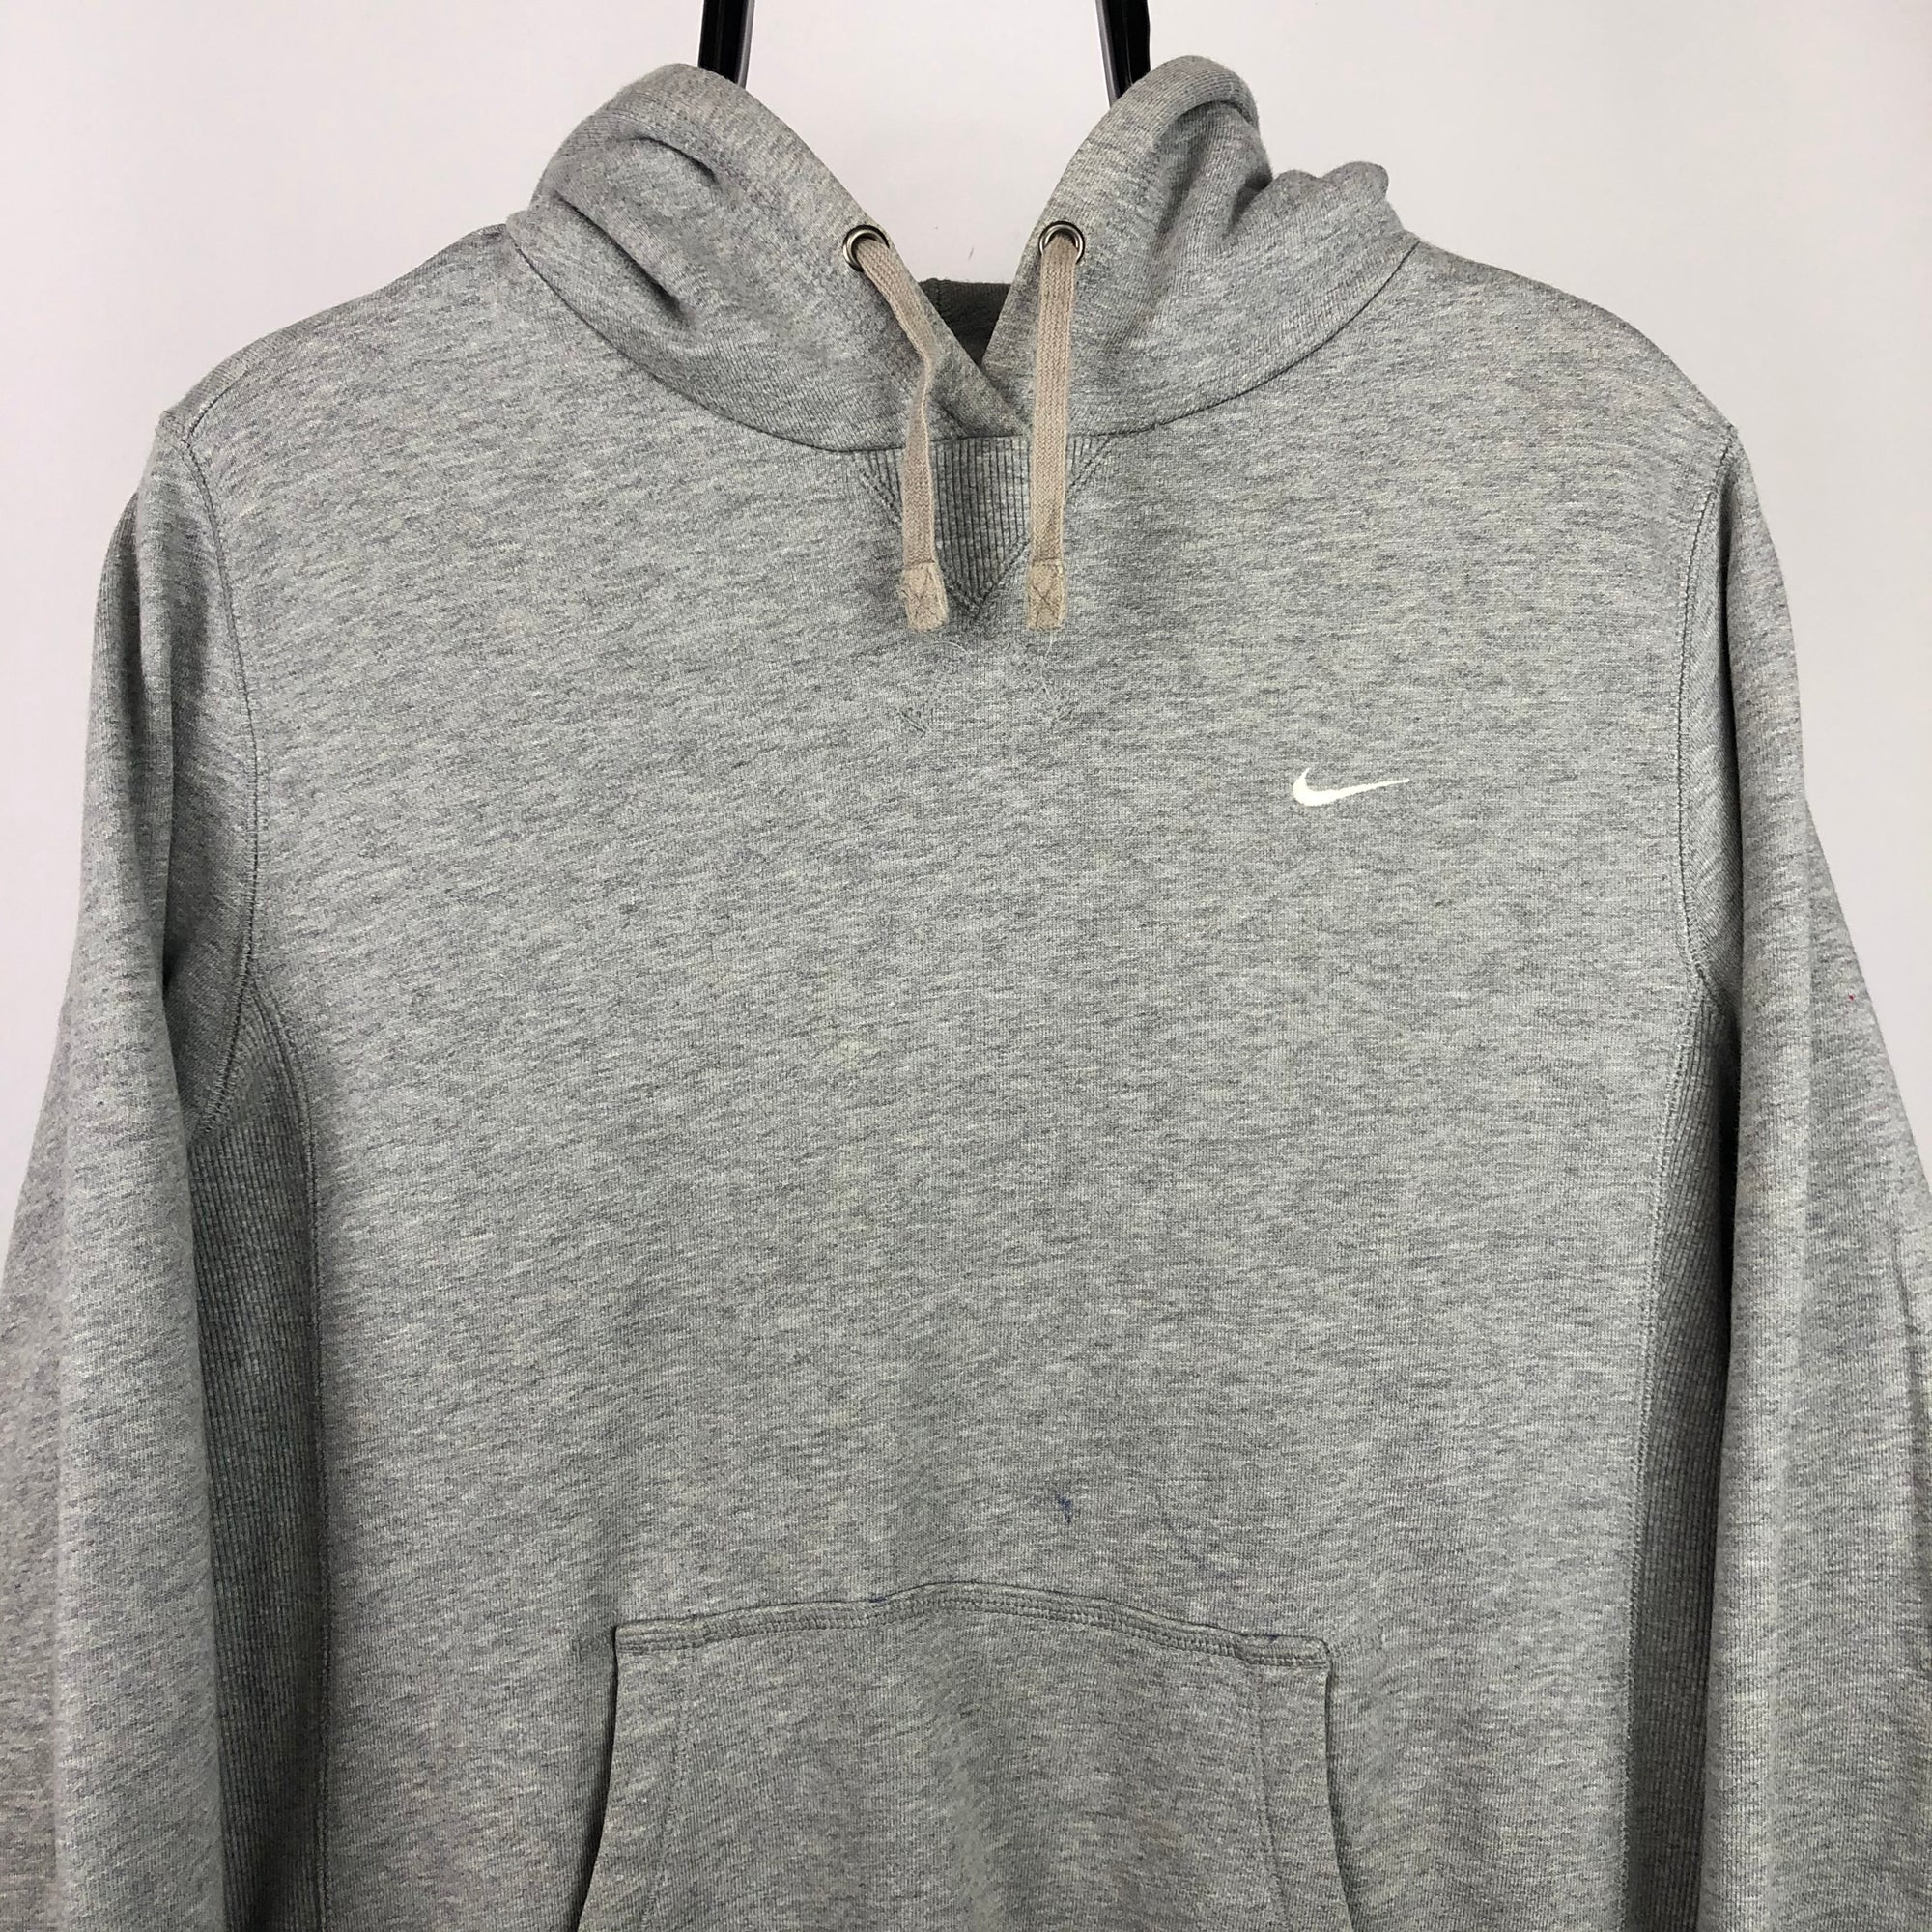 Nike Embroidered Small Swoosh Hoodie in Grey - Men's Medium/Women's Large